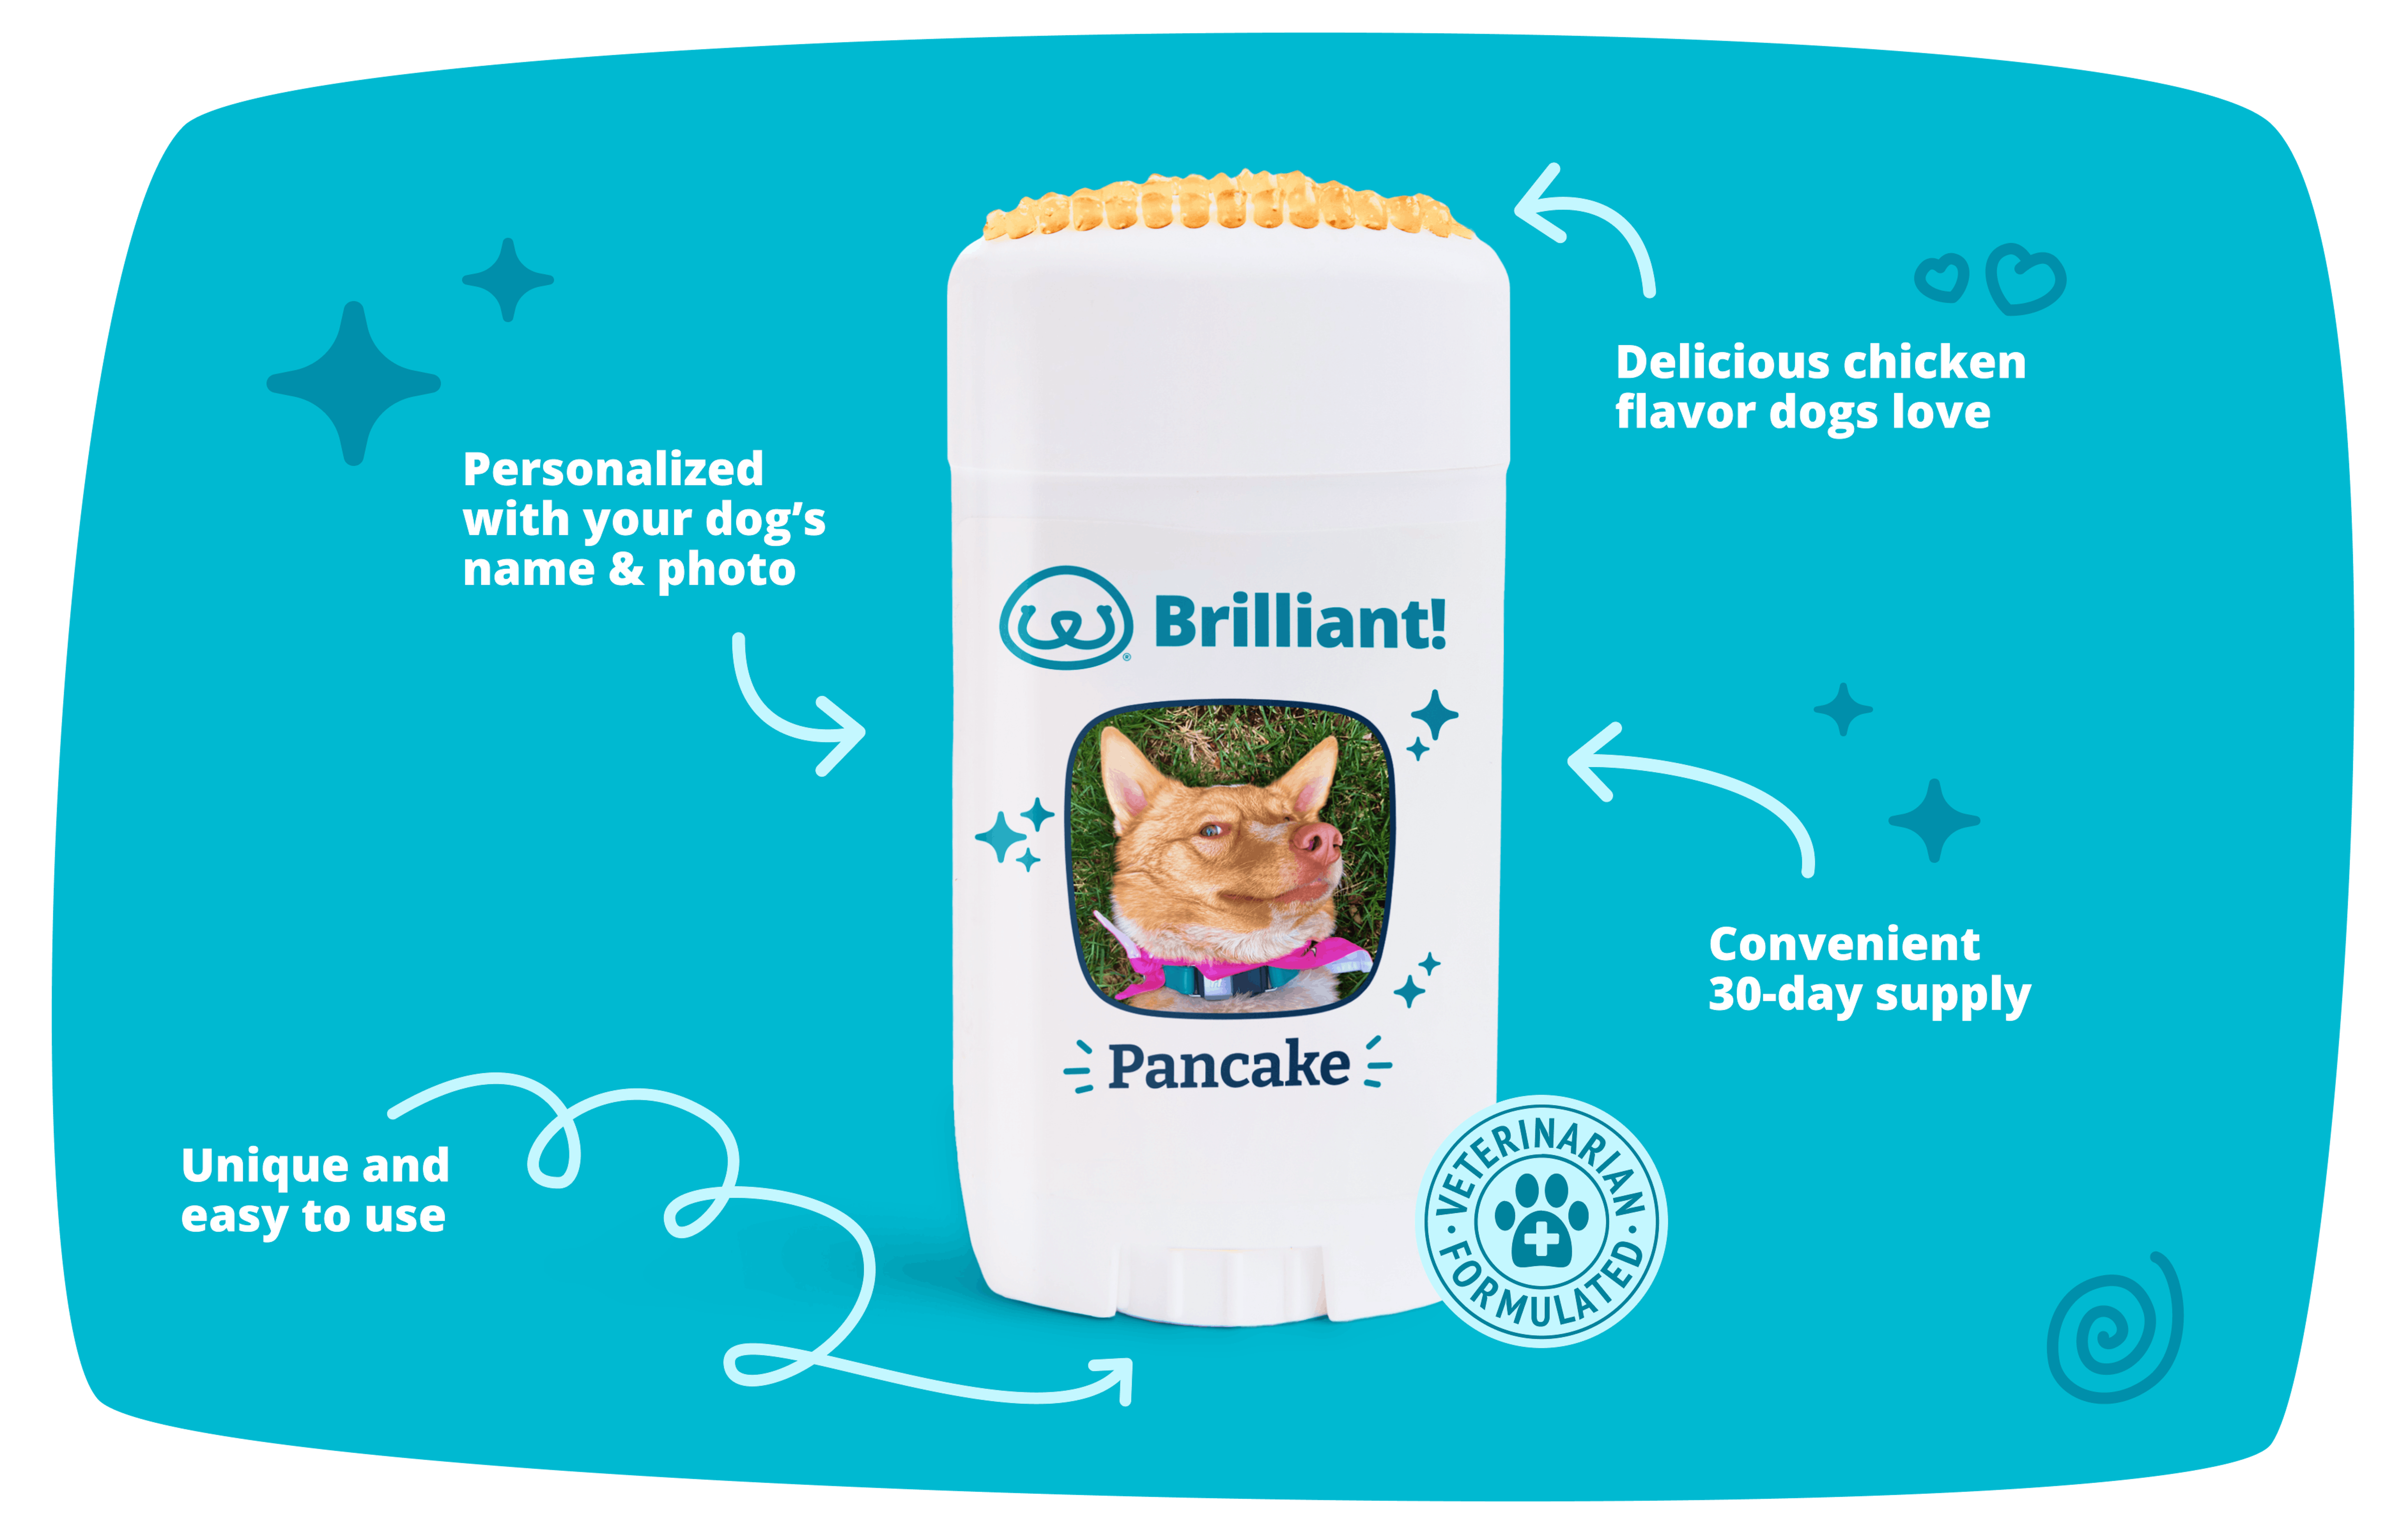 Unique, dog-approved dispenser, delicious chicken flavor, your dog's name and photo, 30-day supply